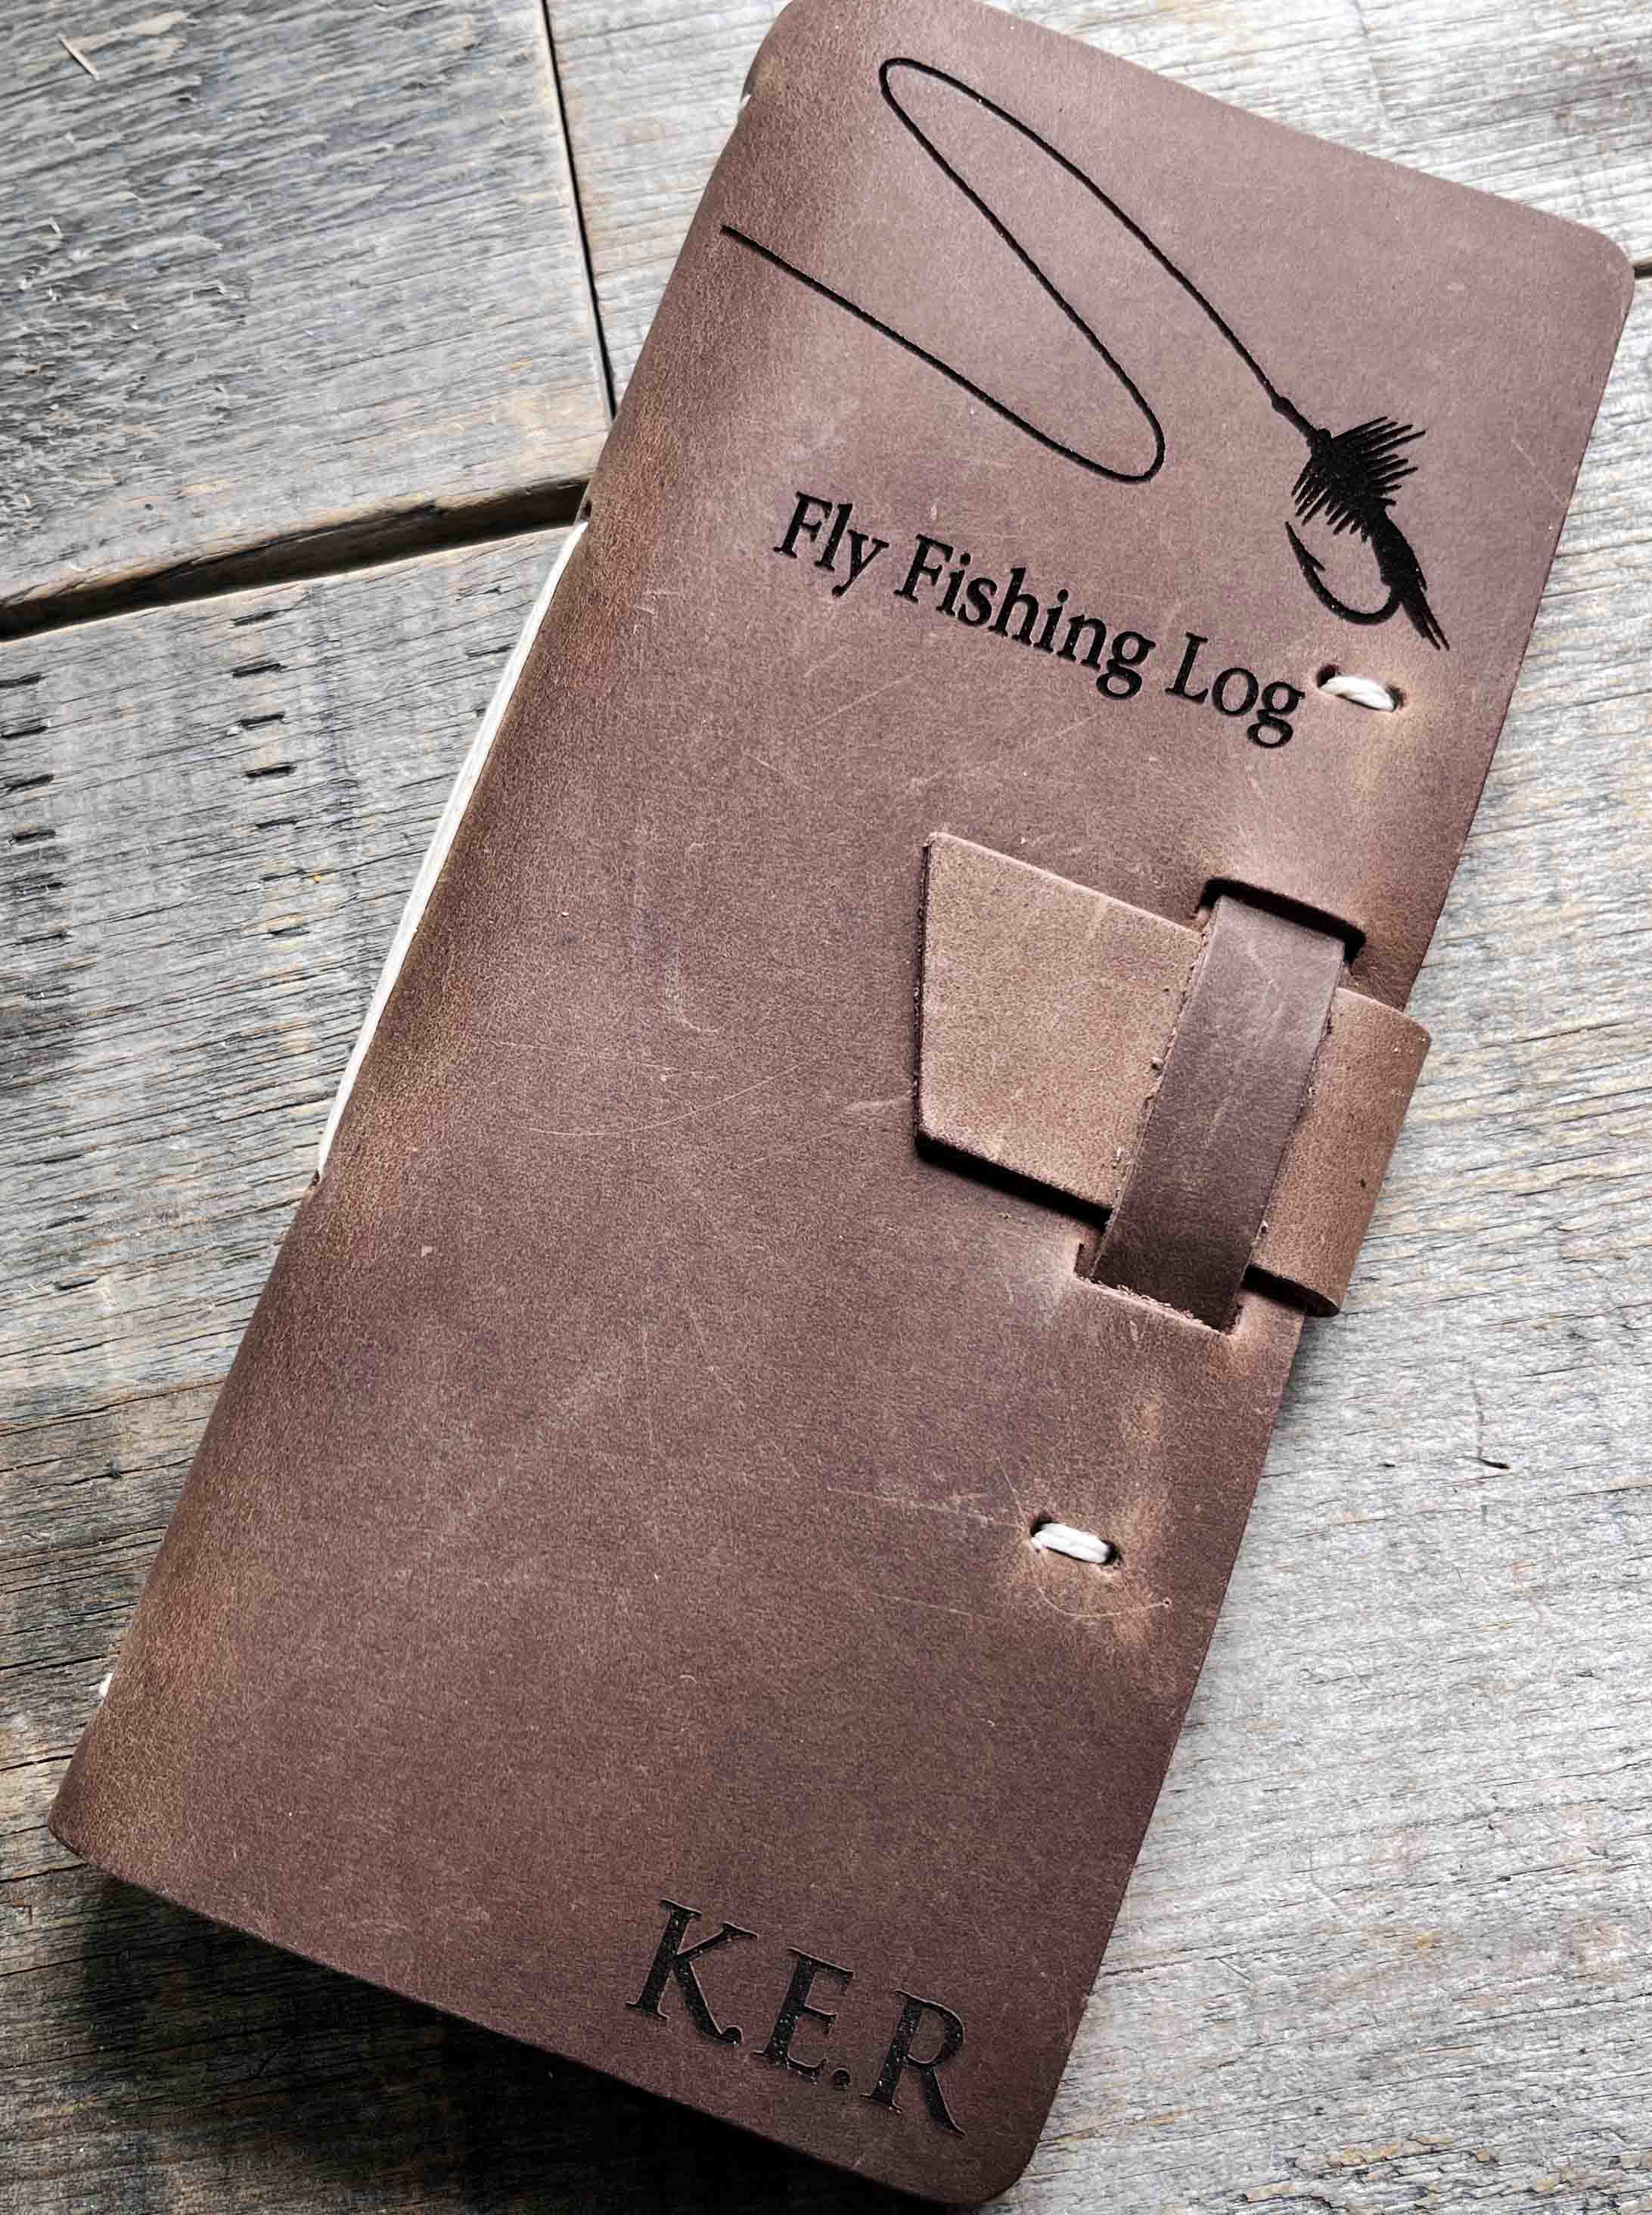 A5 FISHING LOG BOOK/ DAILY FISHING DIARY/ A5 PERSONALISED FISHERMAN'S  GIFT/07